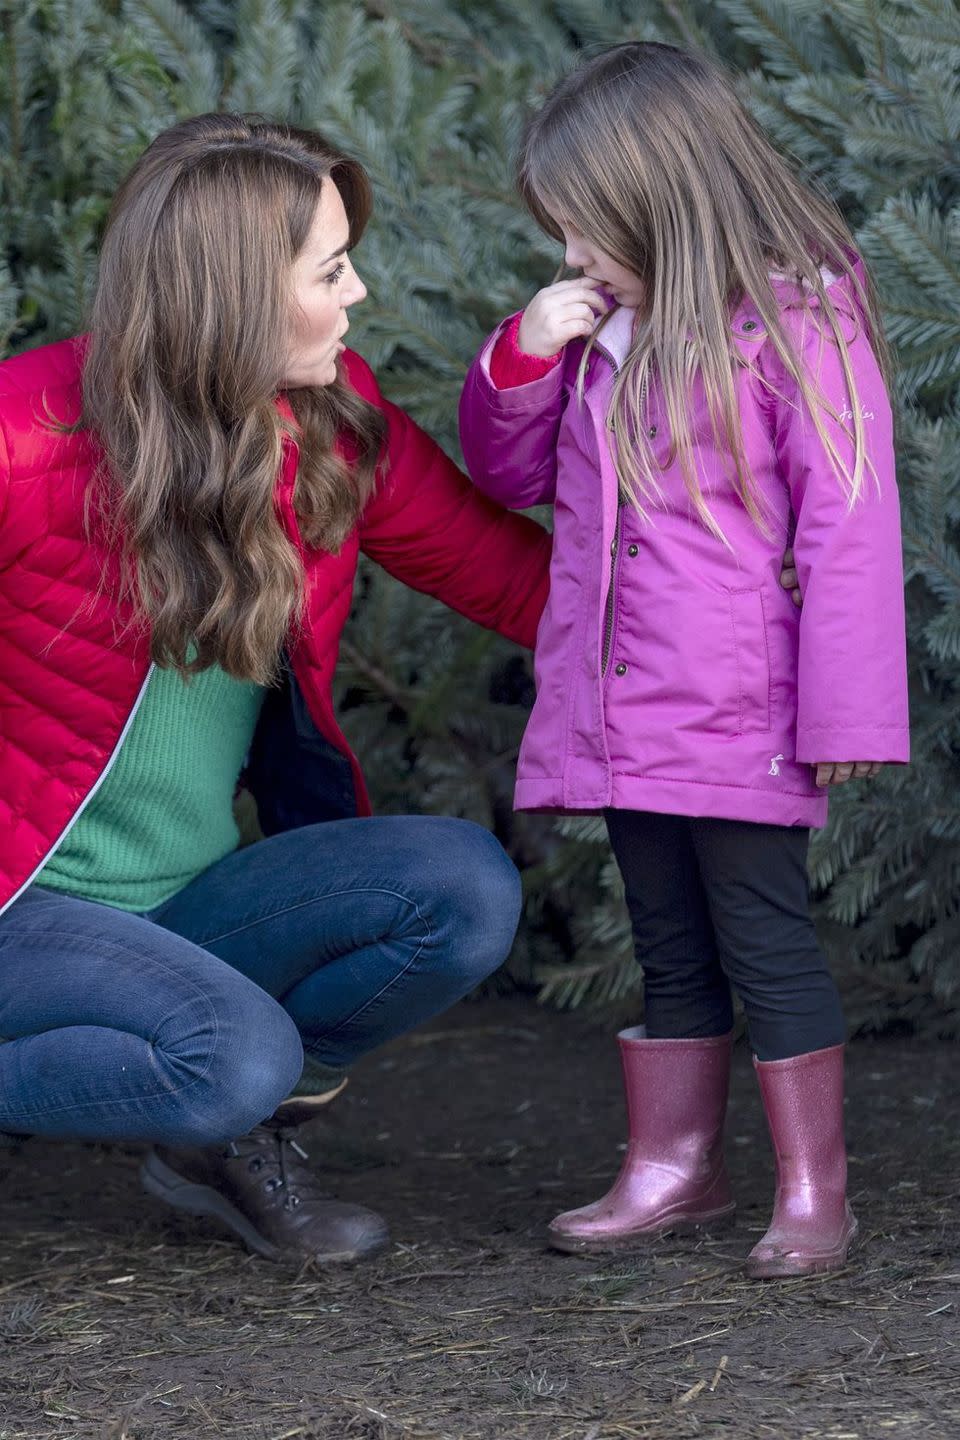 Kate Middleton Picks Out Christmas Trees with Adorable Children